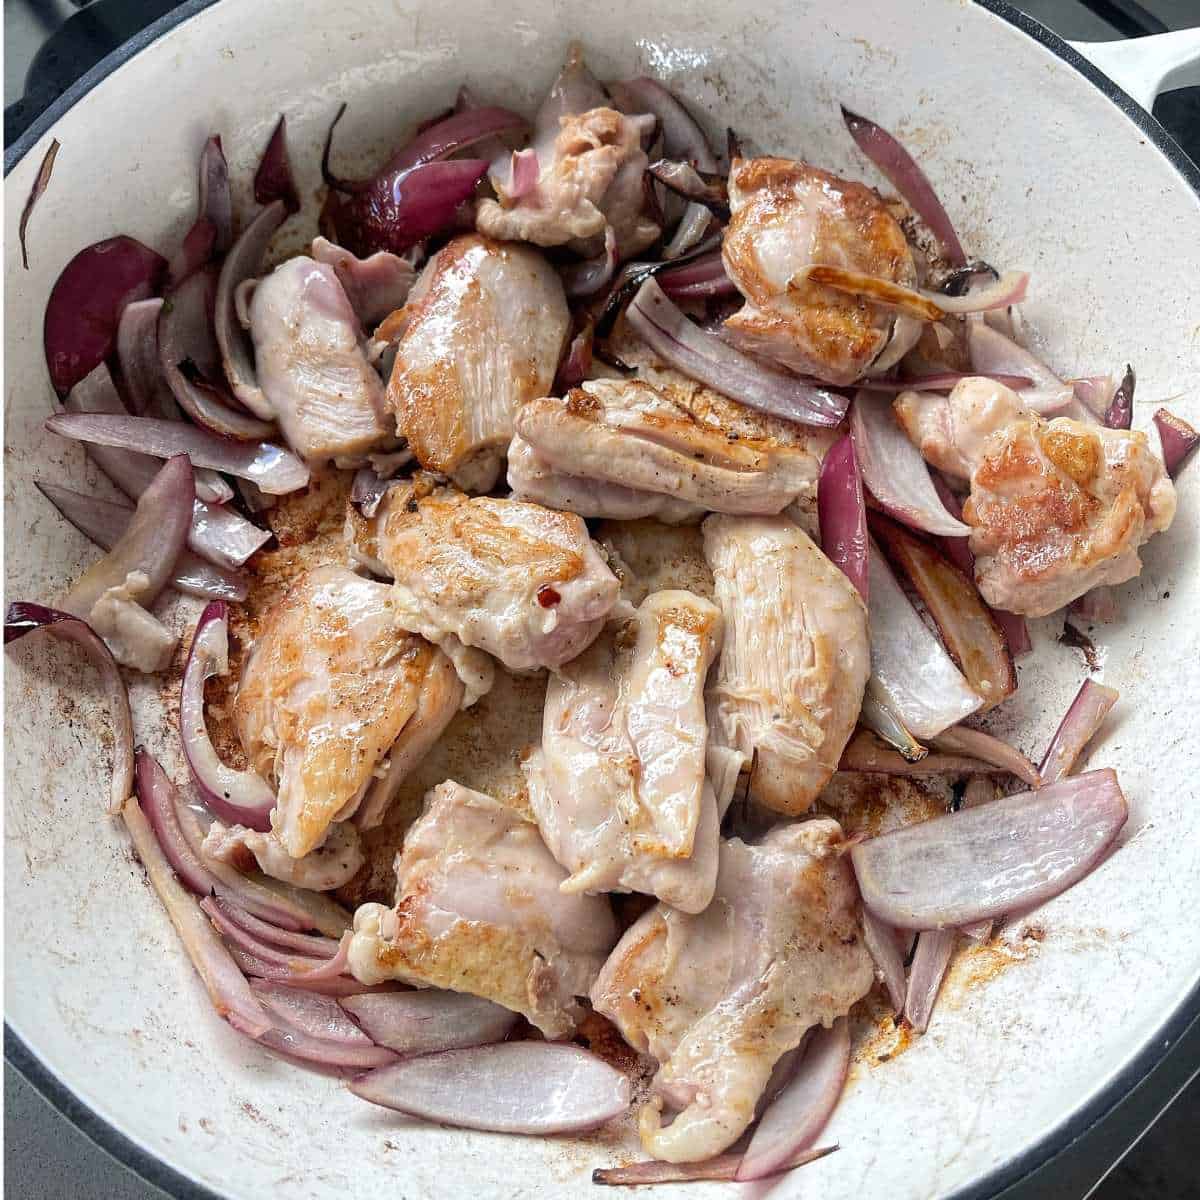 Red onion and sliced chicken pieces of chicken frying over a hob in large white, round oven dish